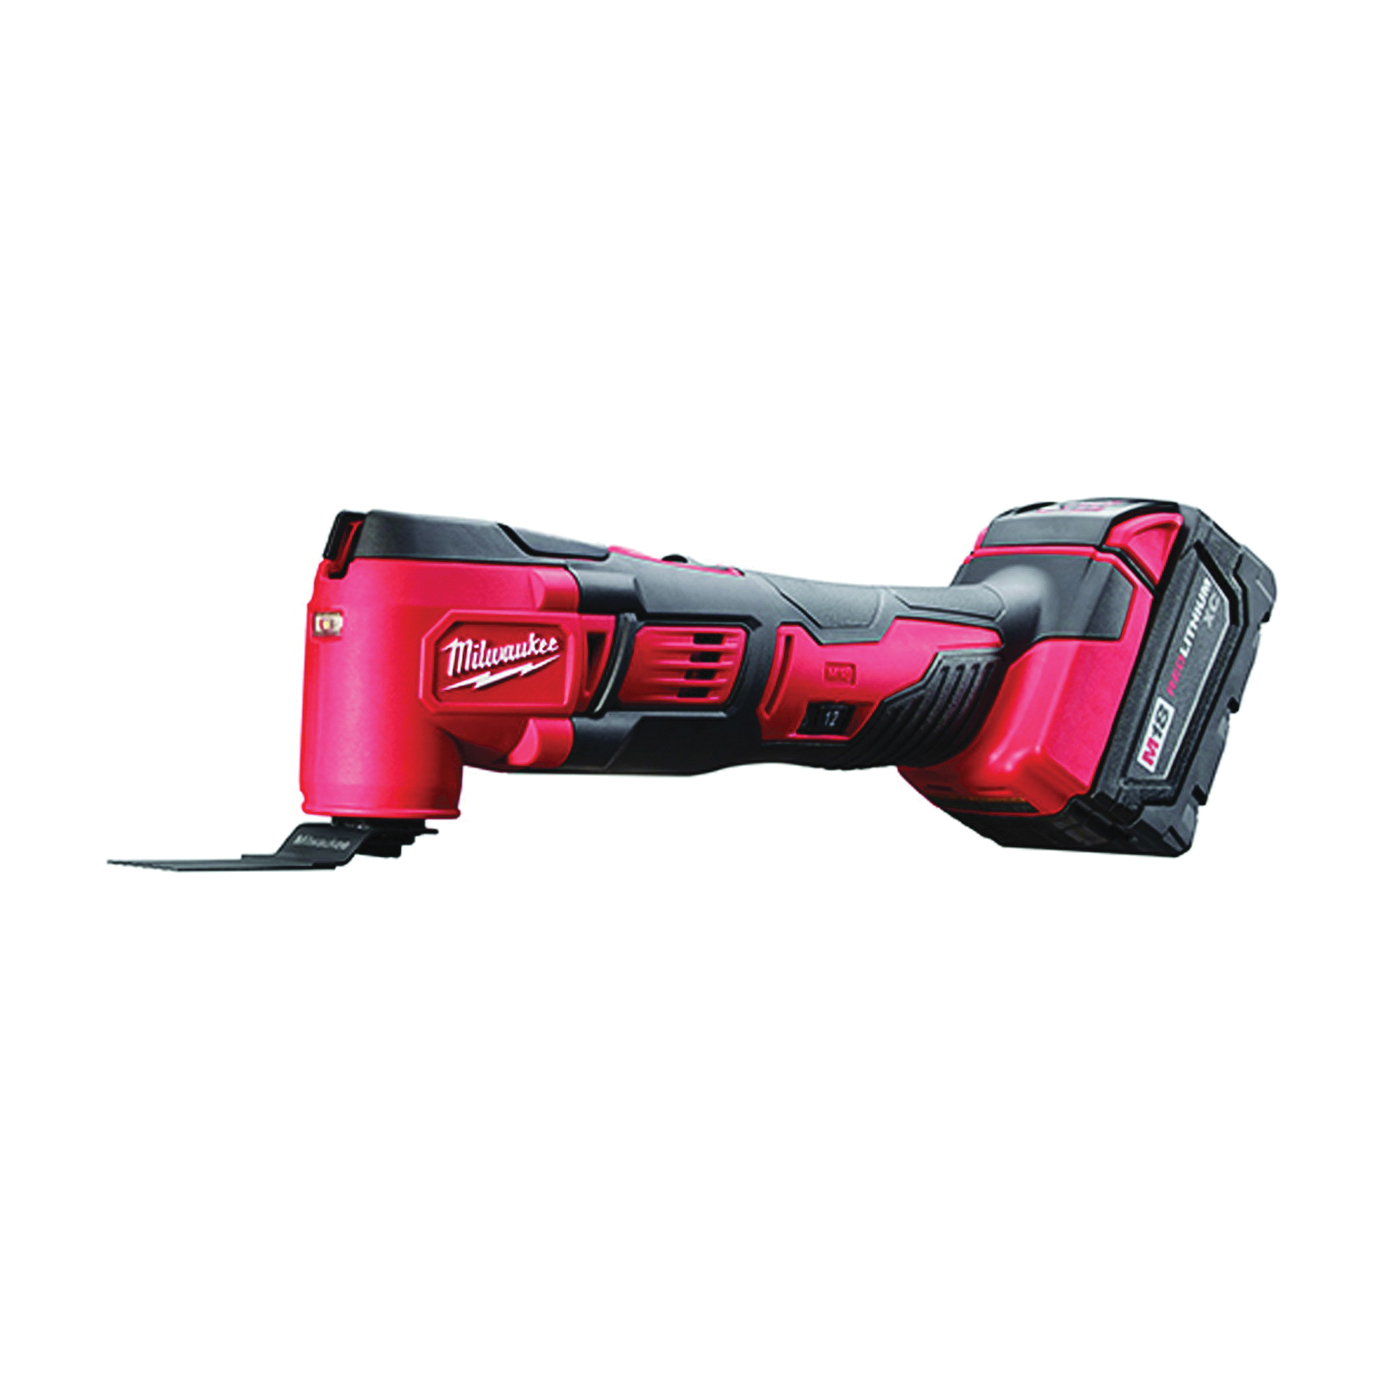 2626-22 Multi-Tool, Battery Included, 18 V, 3 Ah, 11,000 to 18,000 opm, Variable Speed Control